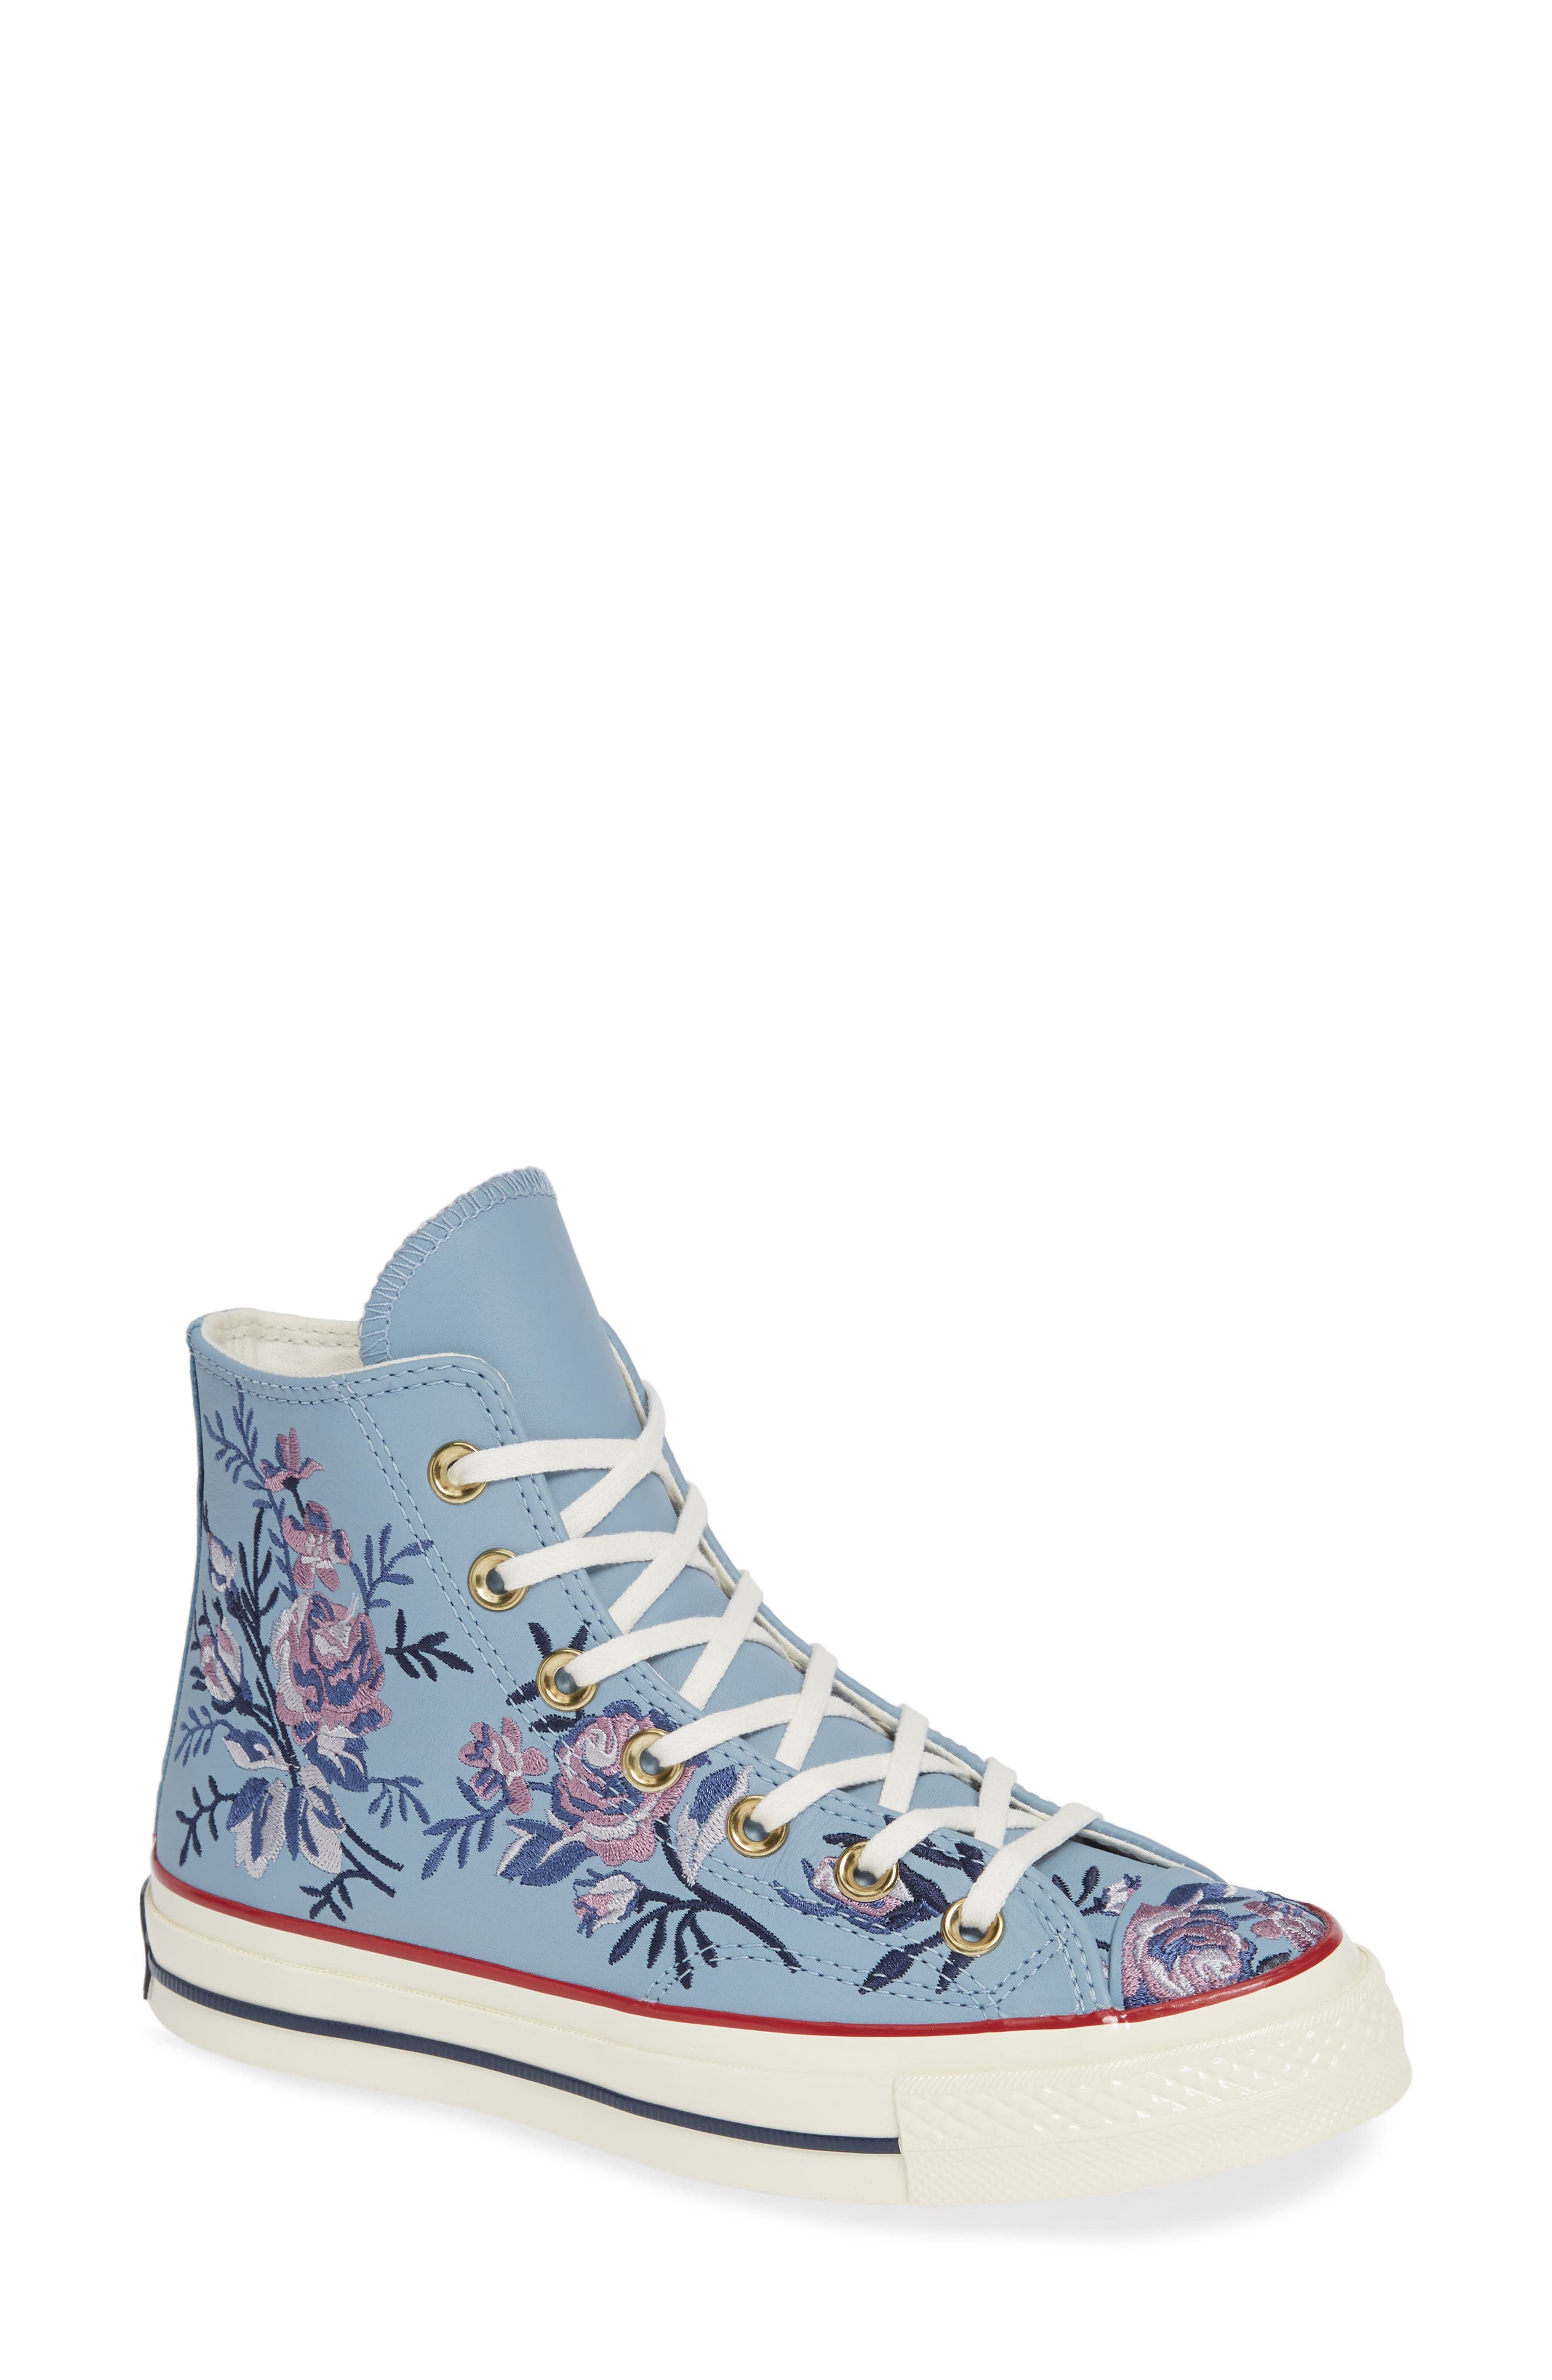 converse chuck 70 parkway floral high top gold